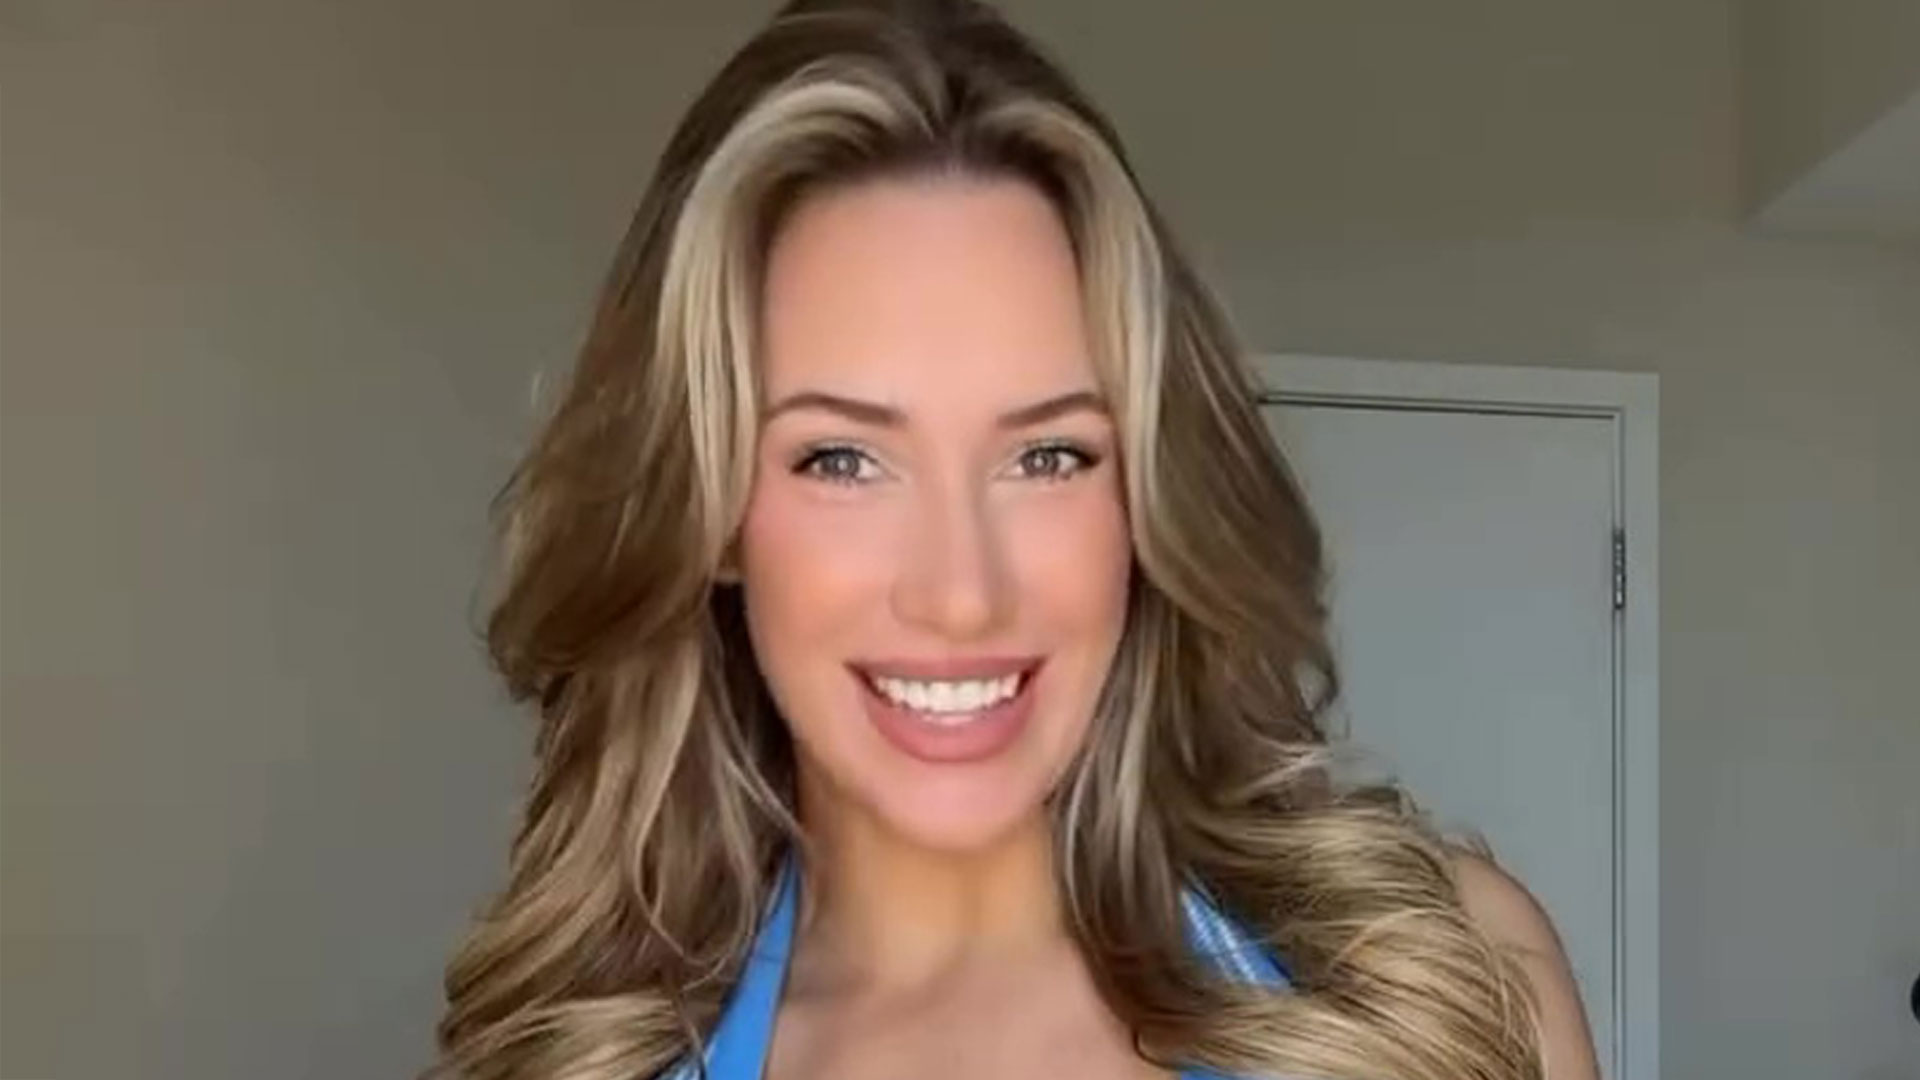 Paige Spiranac hailed for her ‘great tips’ and ‘good insight’ as ex-golf star dazzles in plunging blue top [Video]